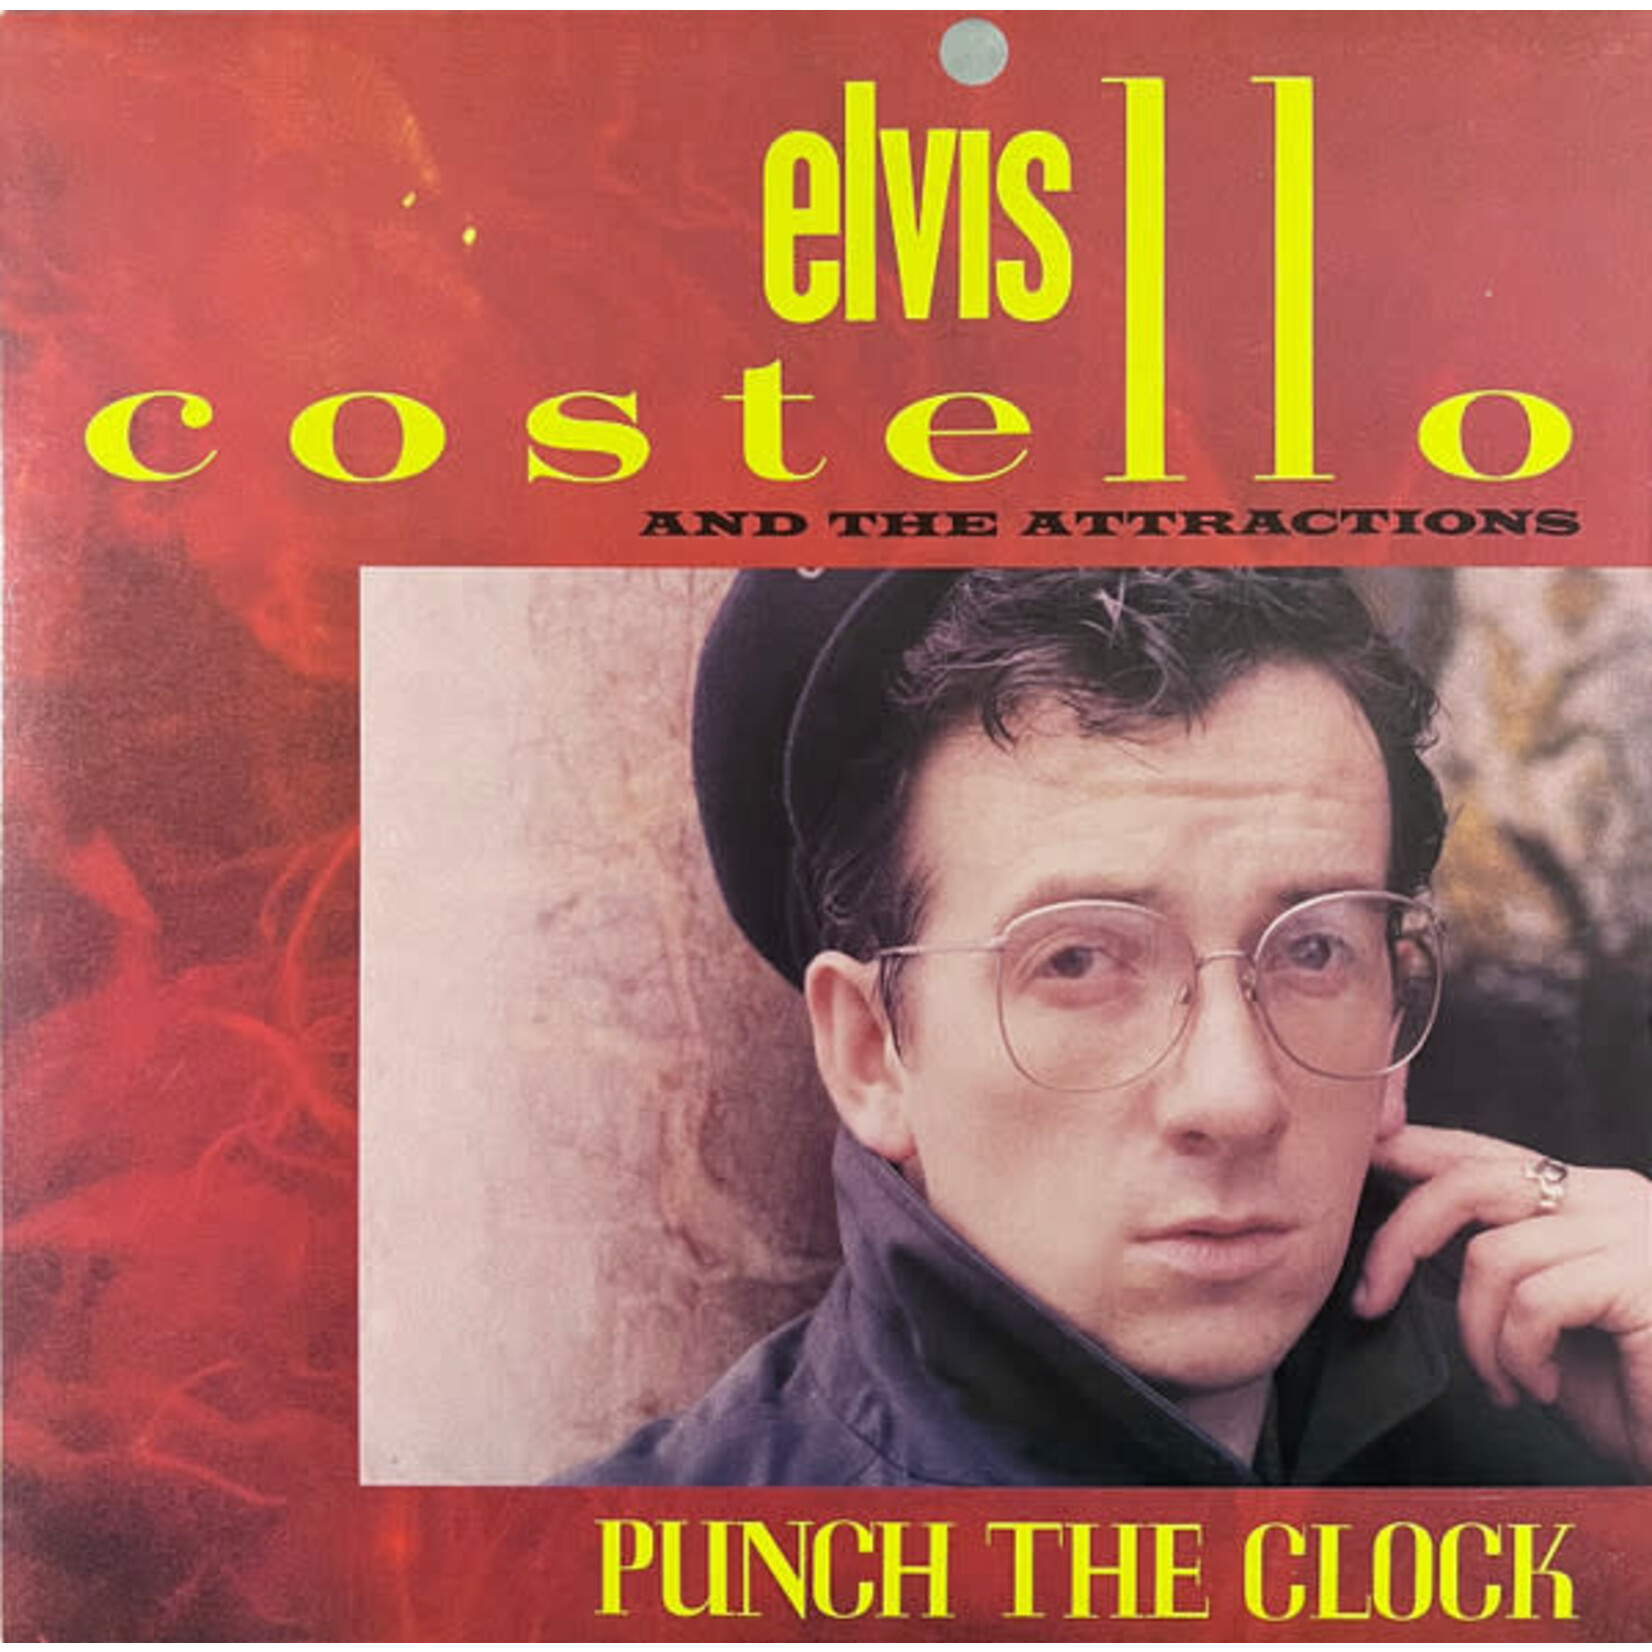 Elvis Costello & The Attractions – Punch The Clock (VG, 1983, LP, Columbia – FC 38897, Columbia – 38897)